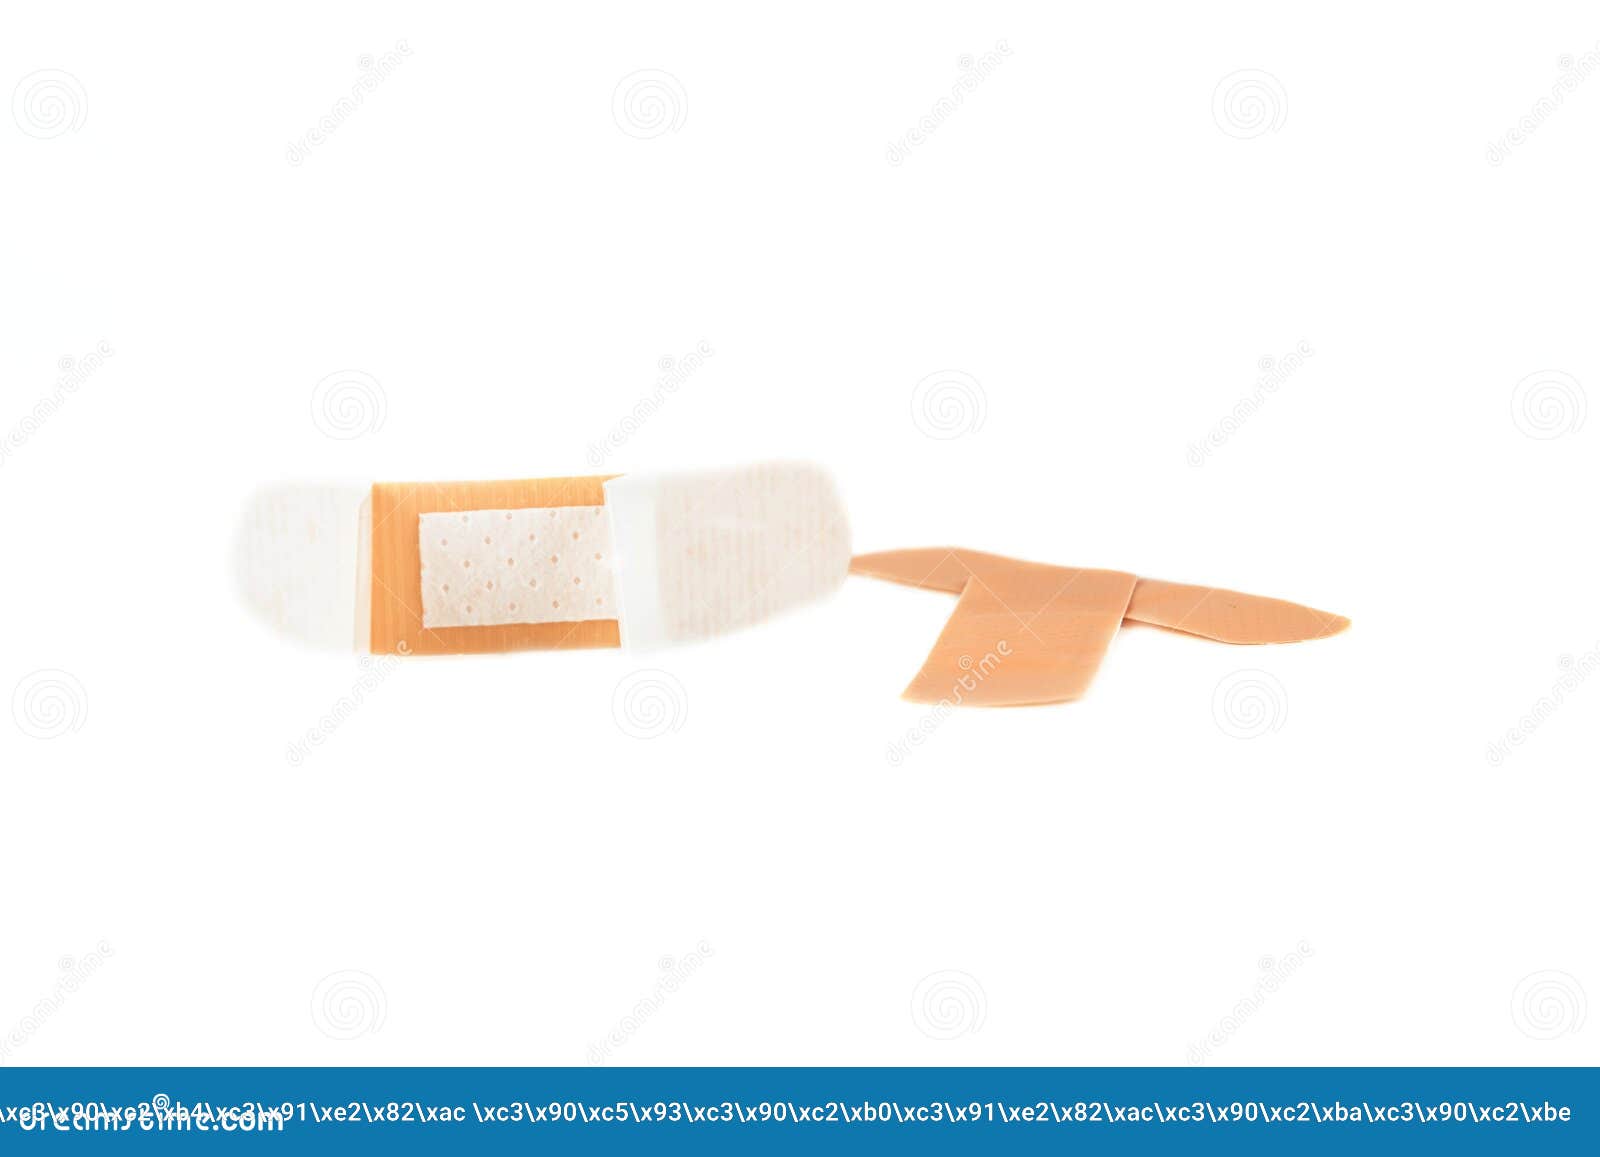 Adhesive Plaster On White Background Healing Wounds Scratches Sadin